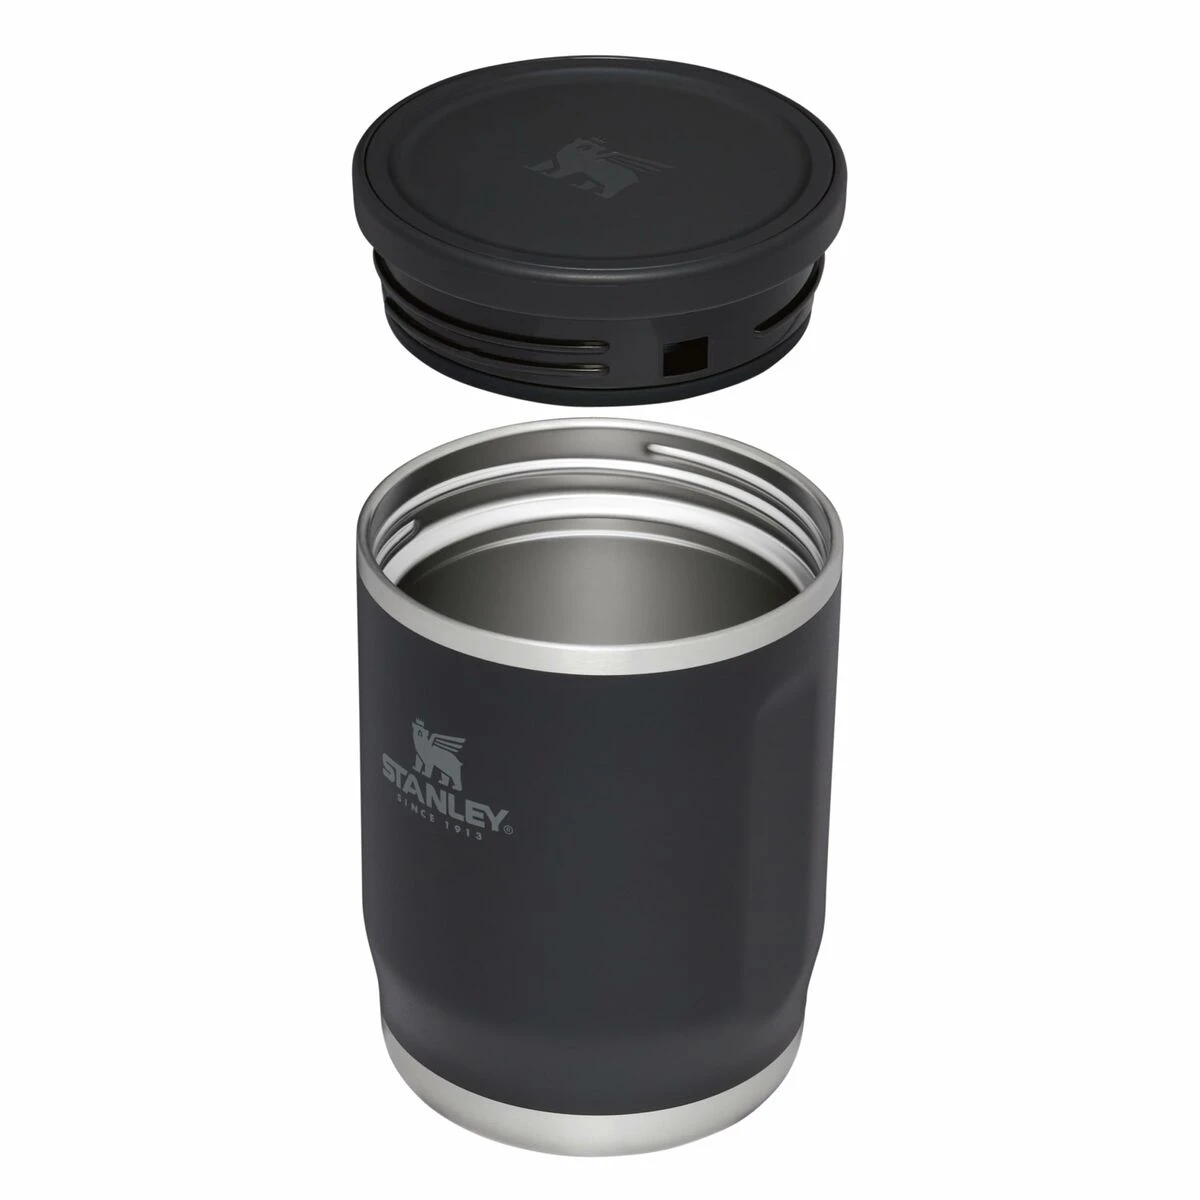 Stanley insulated tumbler with lid aside.